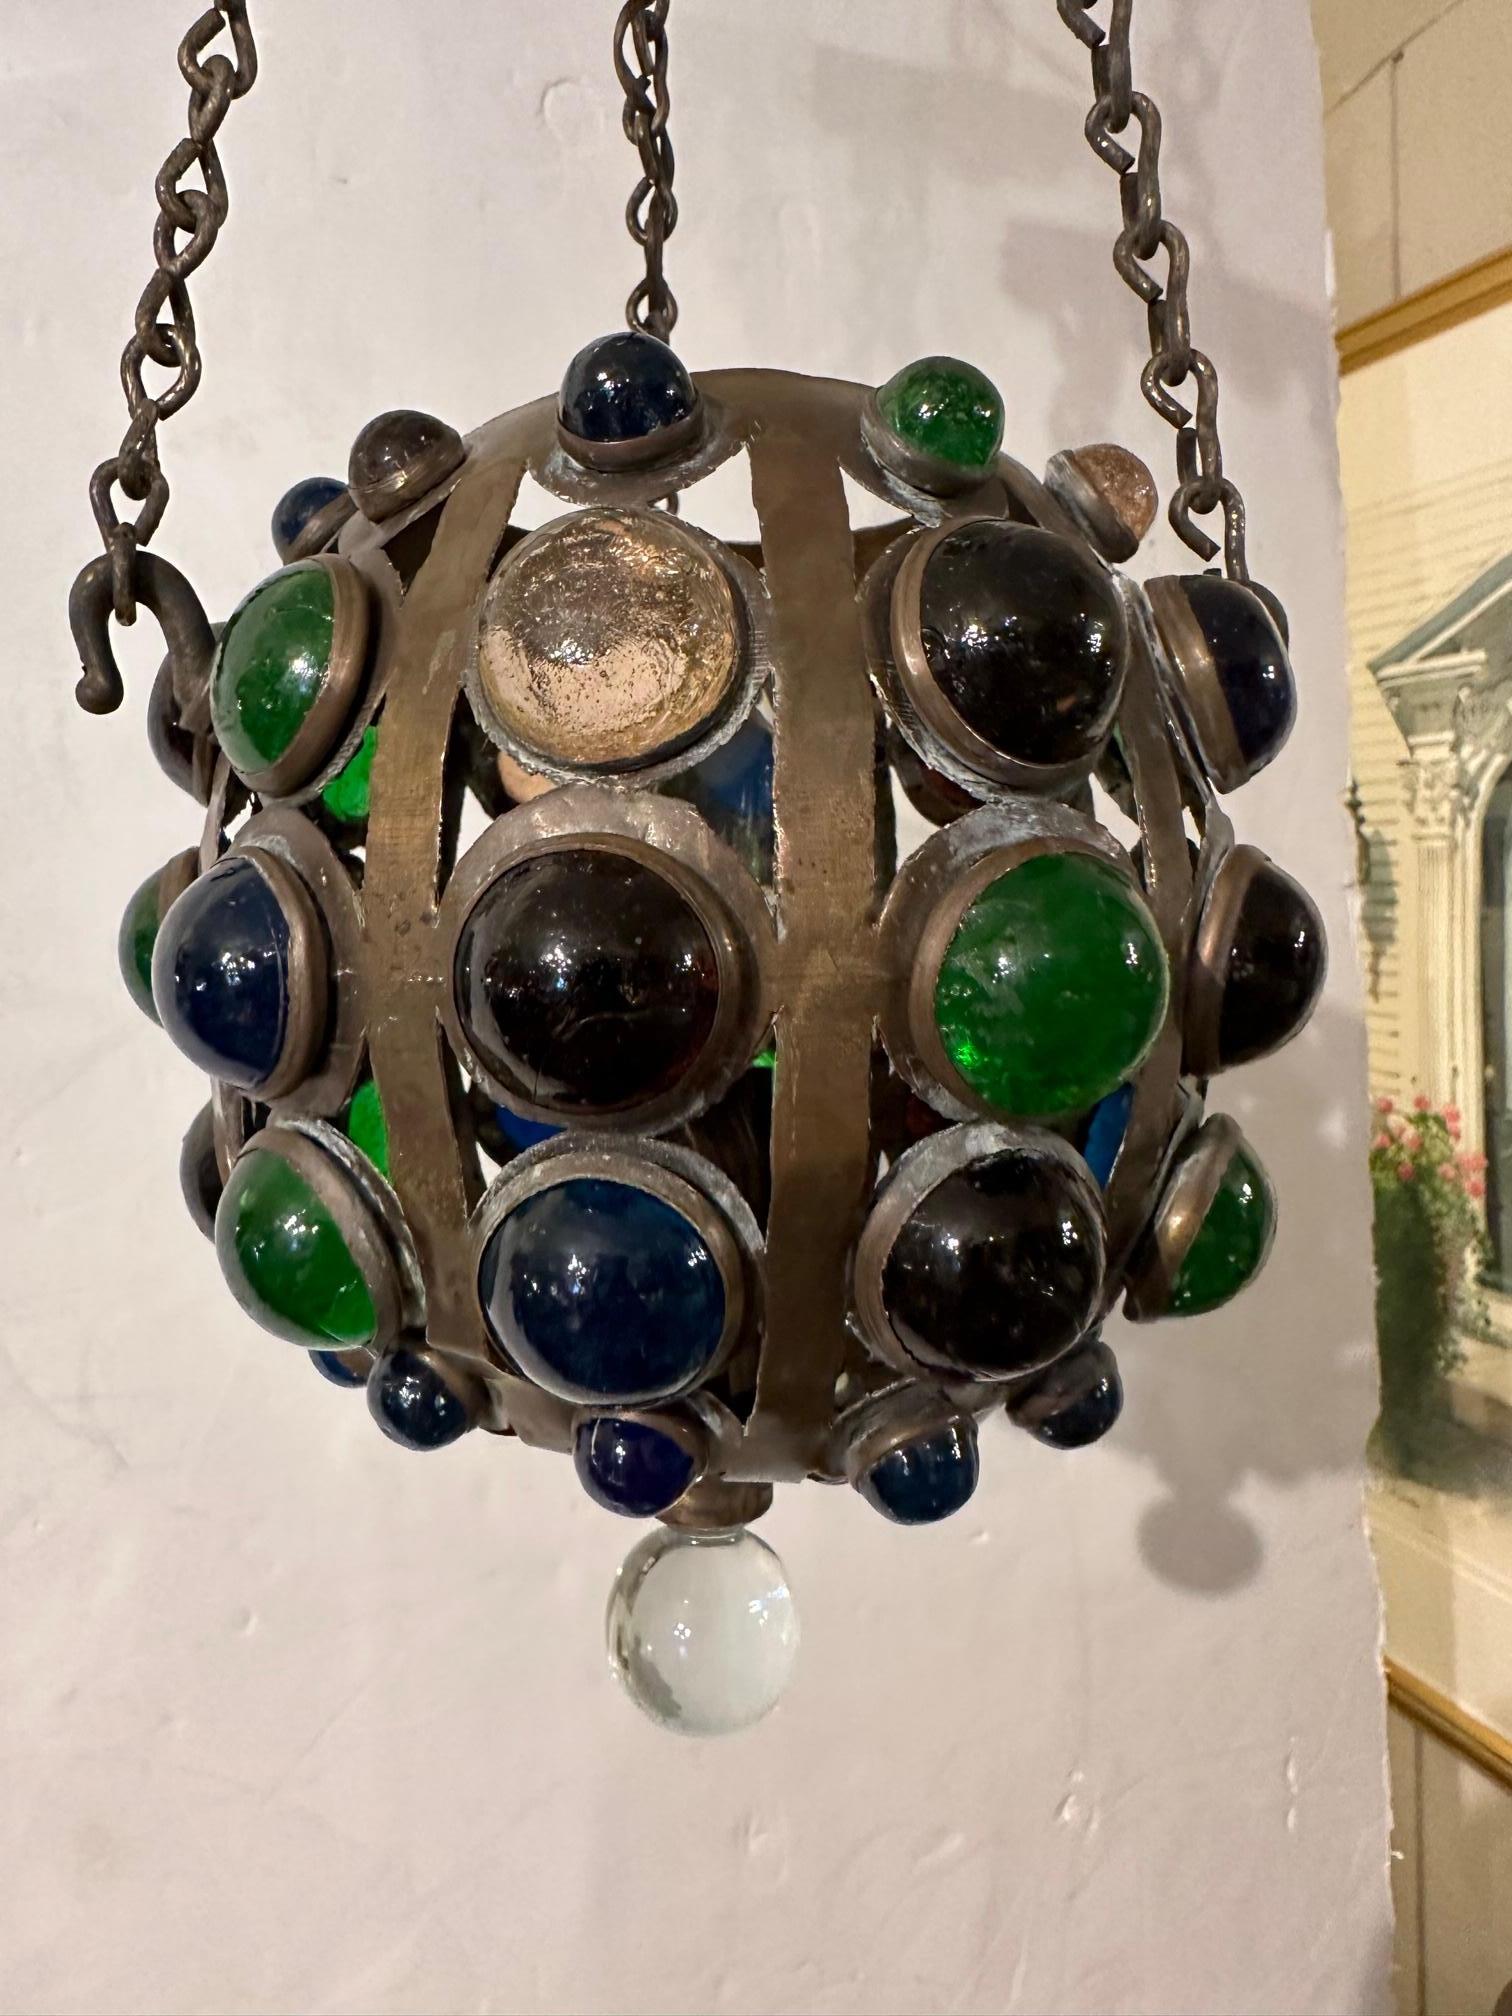 Exotic round bronze pendant encrusted with gem like domed pieces of colored glass. Comes with matching ceiling cap. Single socket. 10